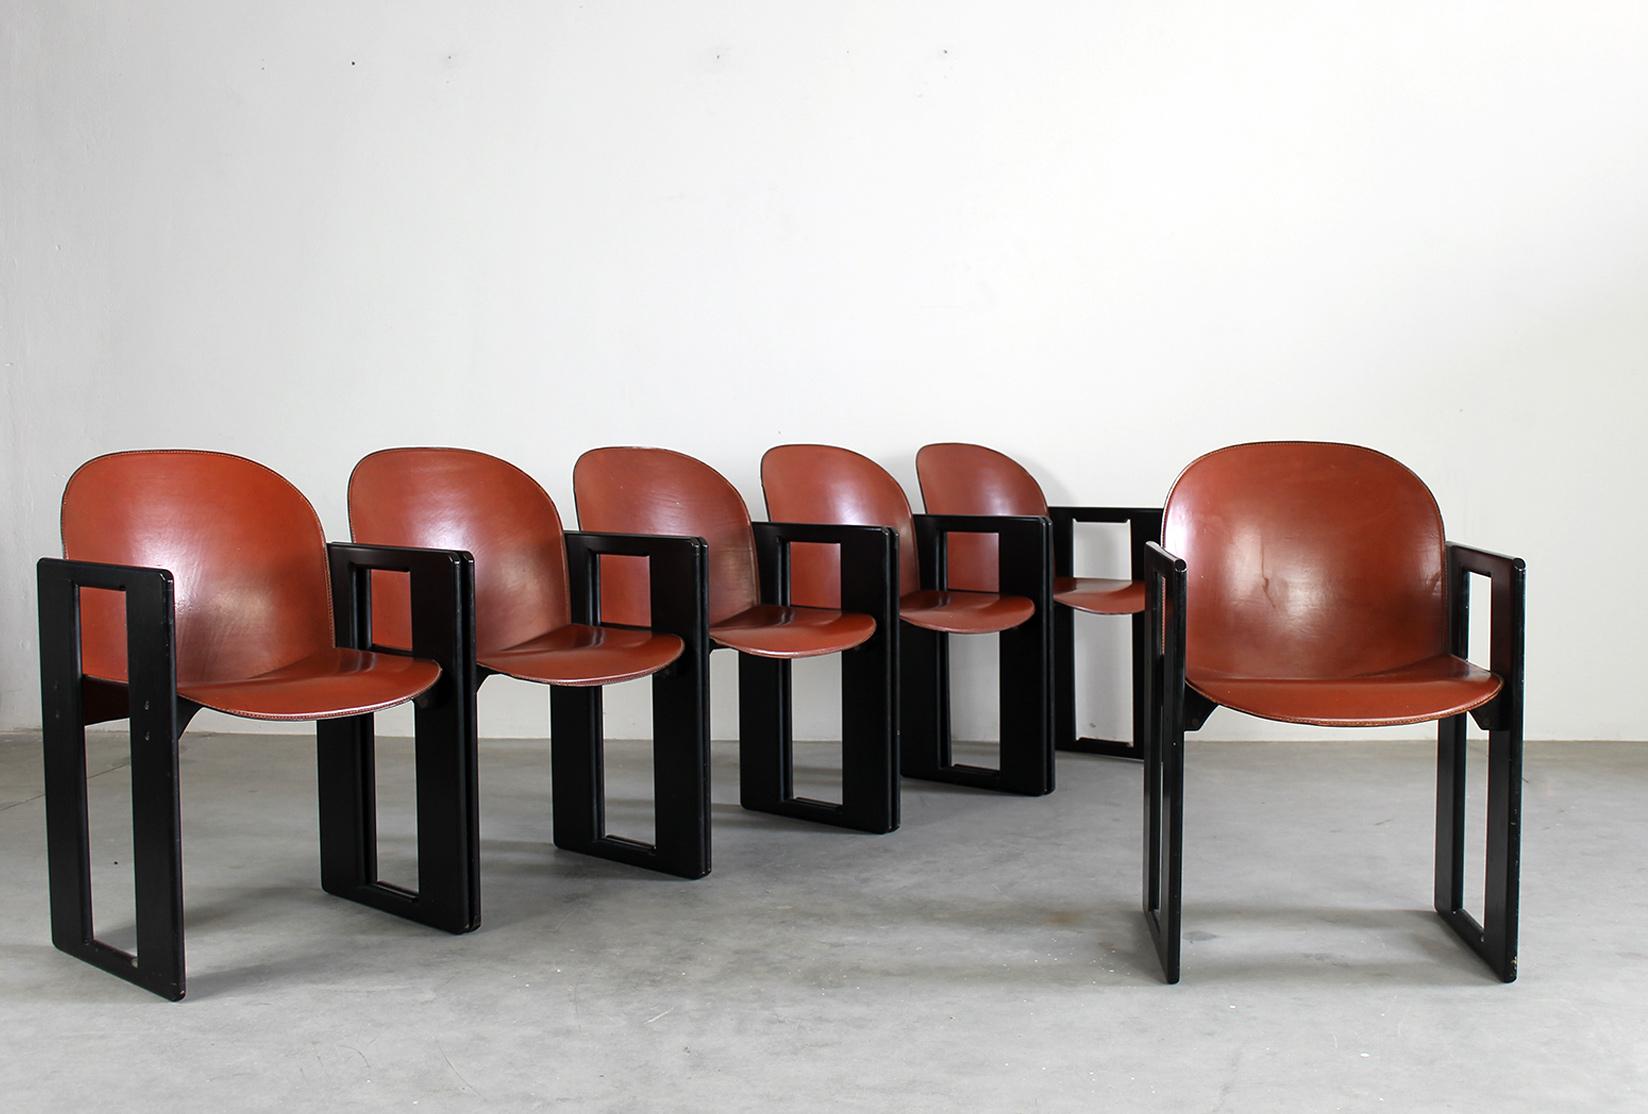 Set of six Dialogo chairs with structure in black lacquered wood, seat and back in leather and metal details. 
Designed by Tobia & Afra Scarpa and produced by B&B Italia in 1970s

The Dialogo chair present a peculiar geometric frame in wood to which